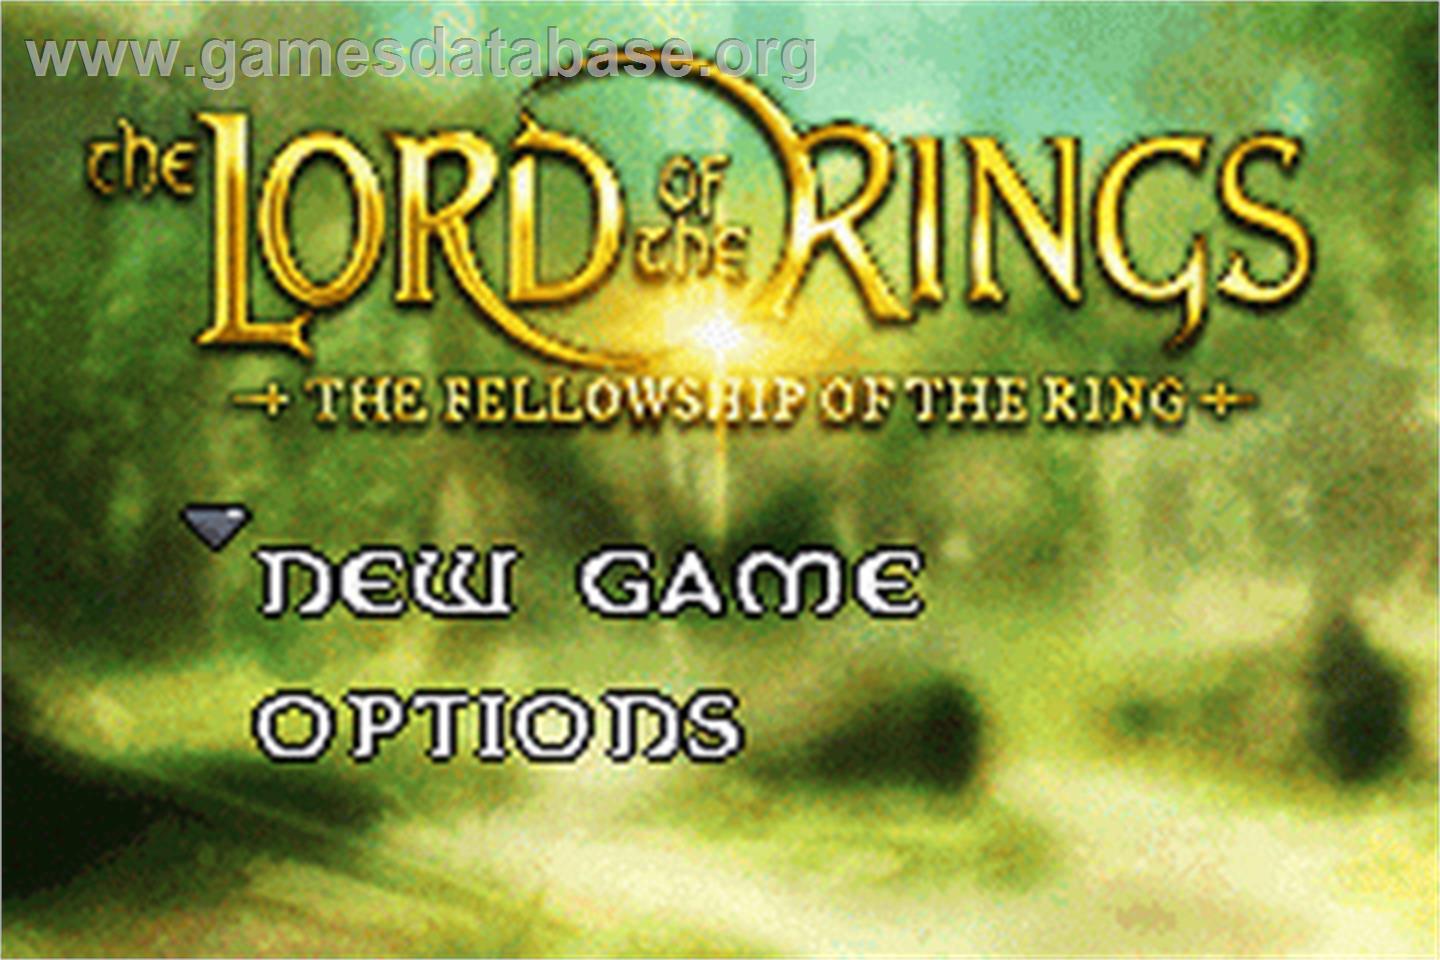 Lord of the Rings: The Fellowship of the Ring - Nintendo Game Boy Advance - Artwork - Title Screen